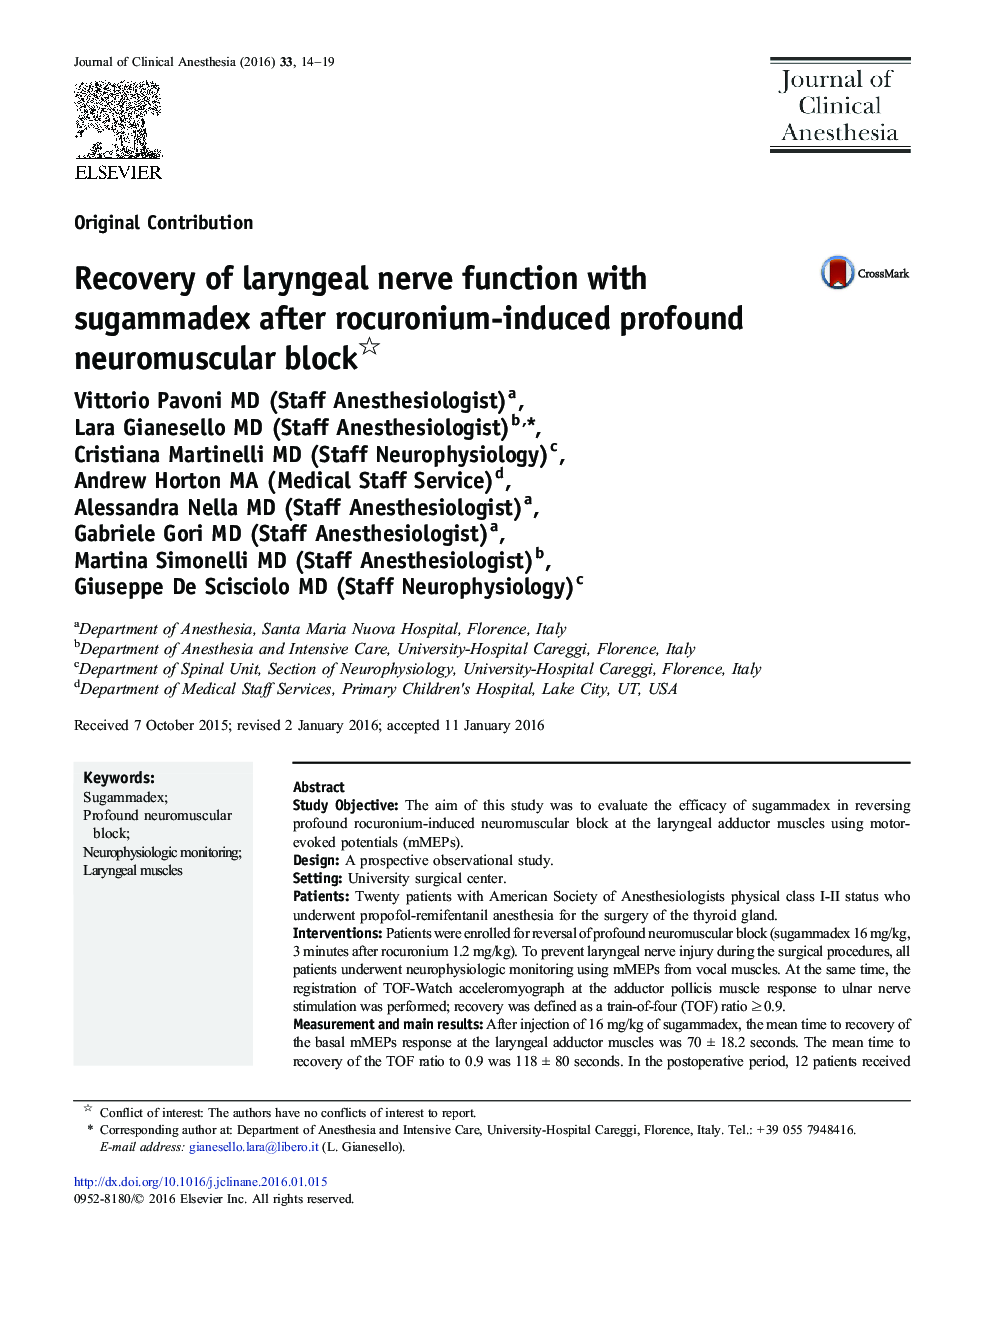 Recovery of laryngeal nerve function with sugammadex after rocuronium-induced profound neuromuscular block 